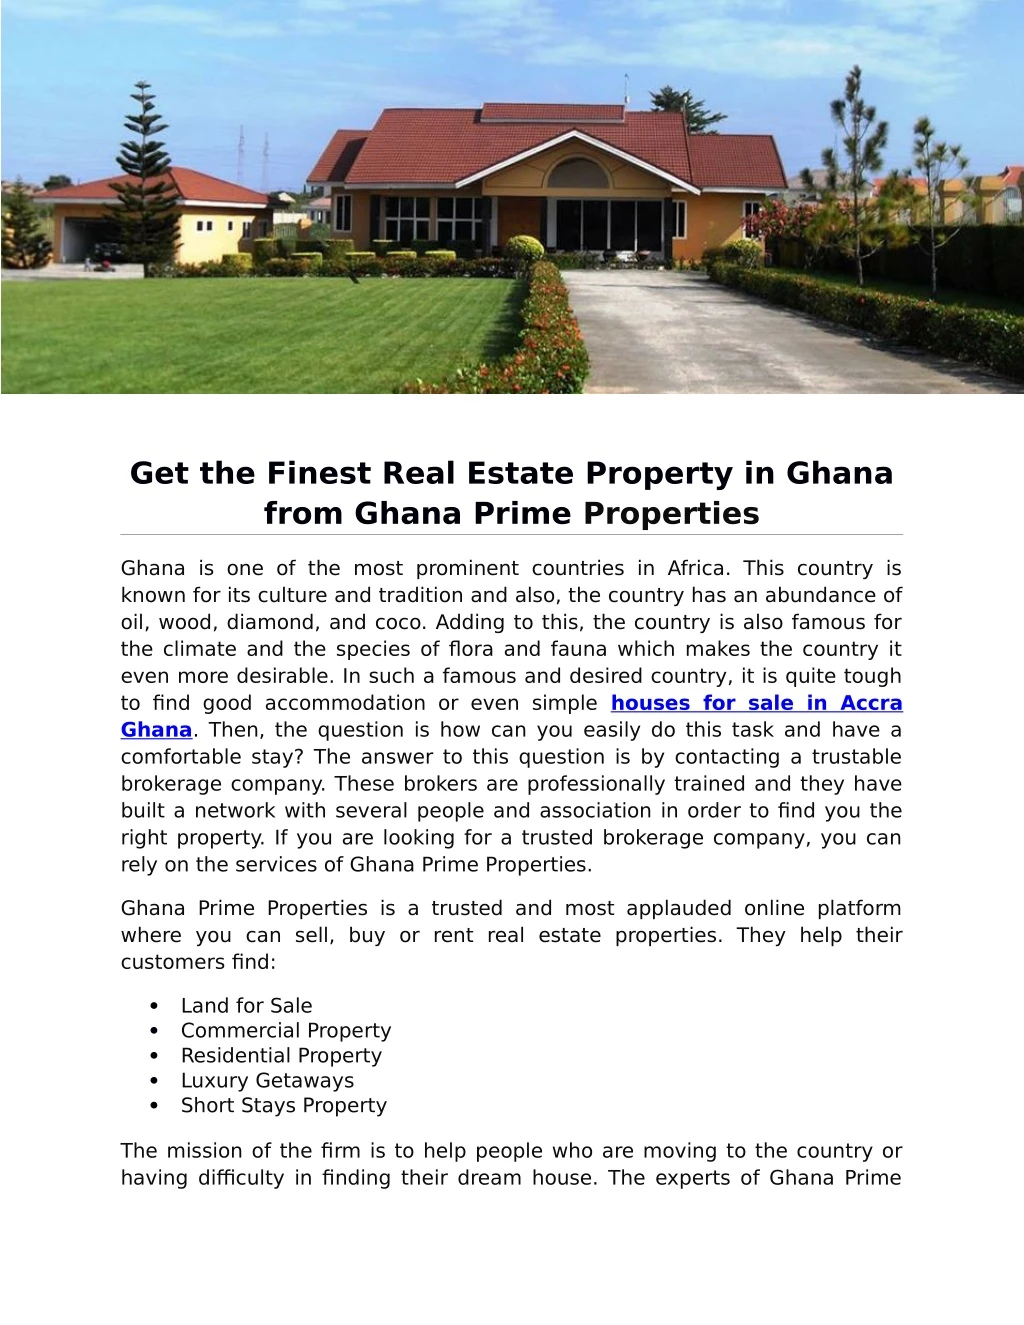 get the finest real estate property in ghana from